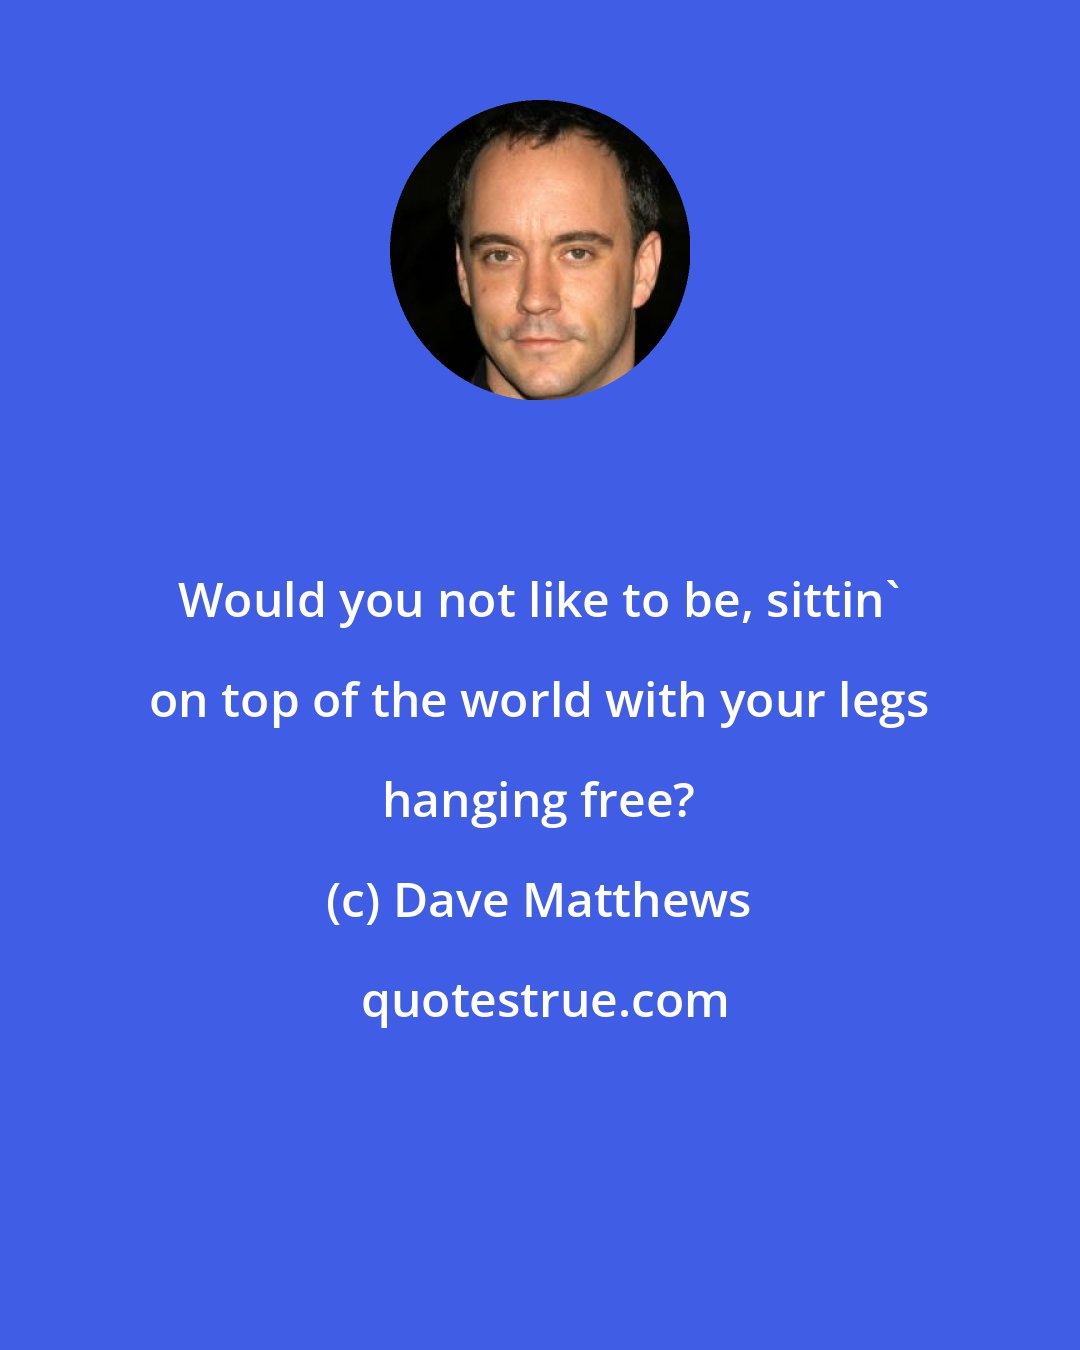 Dave Matthews: Would you not like to be, sittin' on top of the world with your legs hanging free?